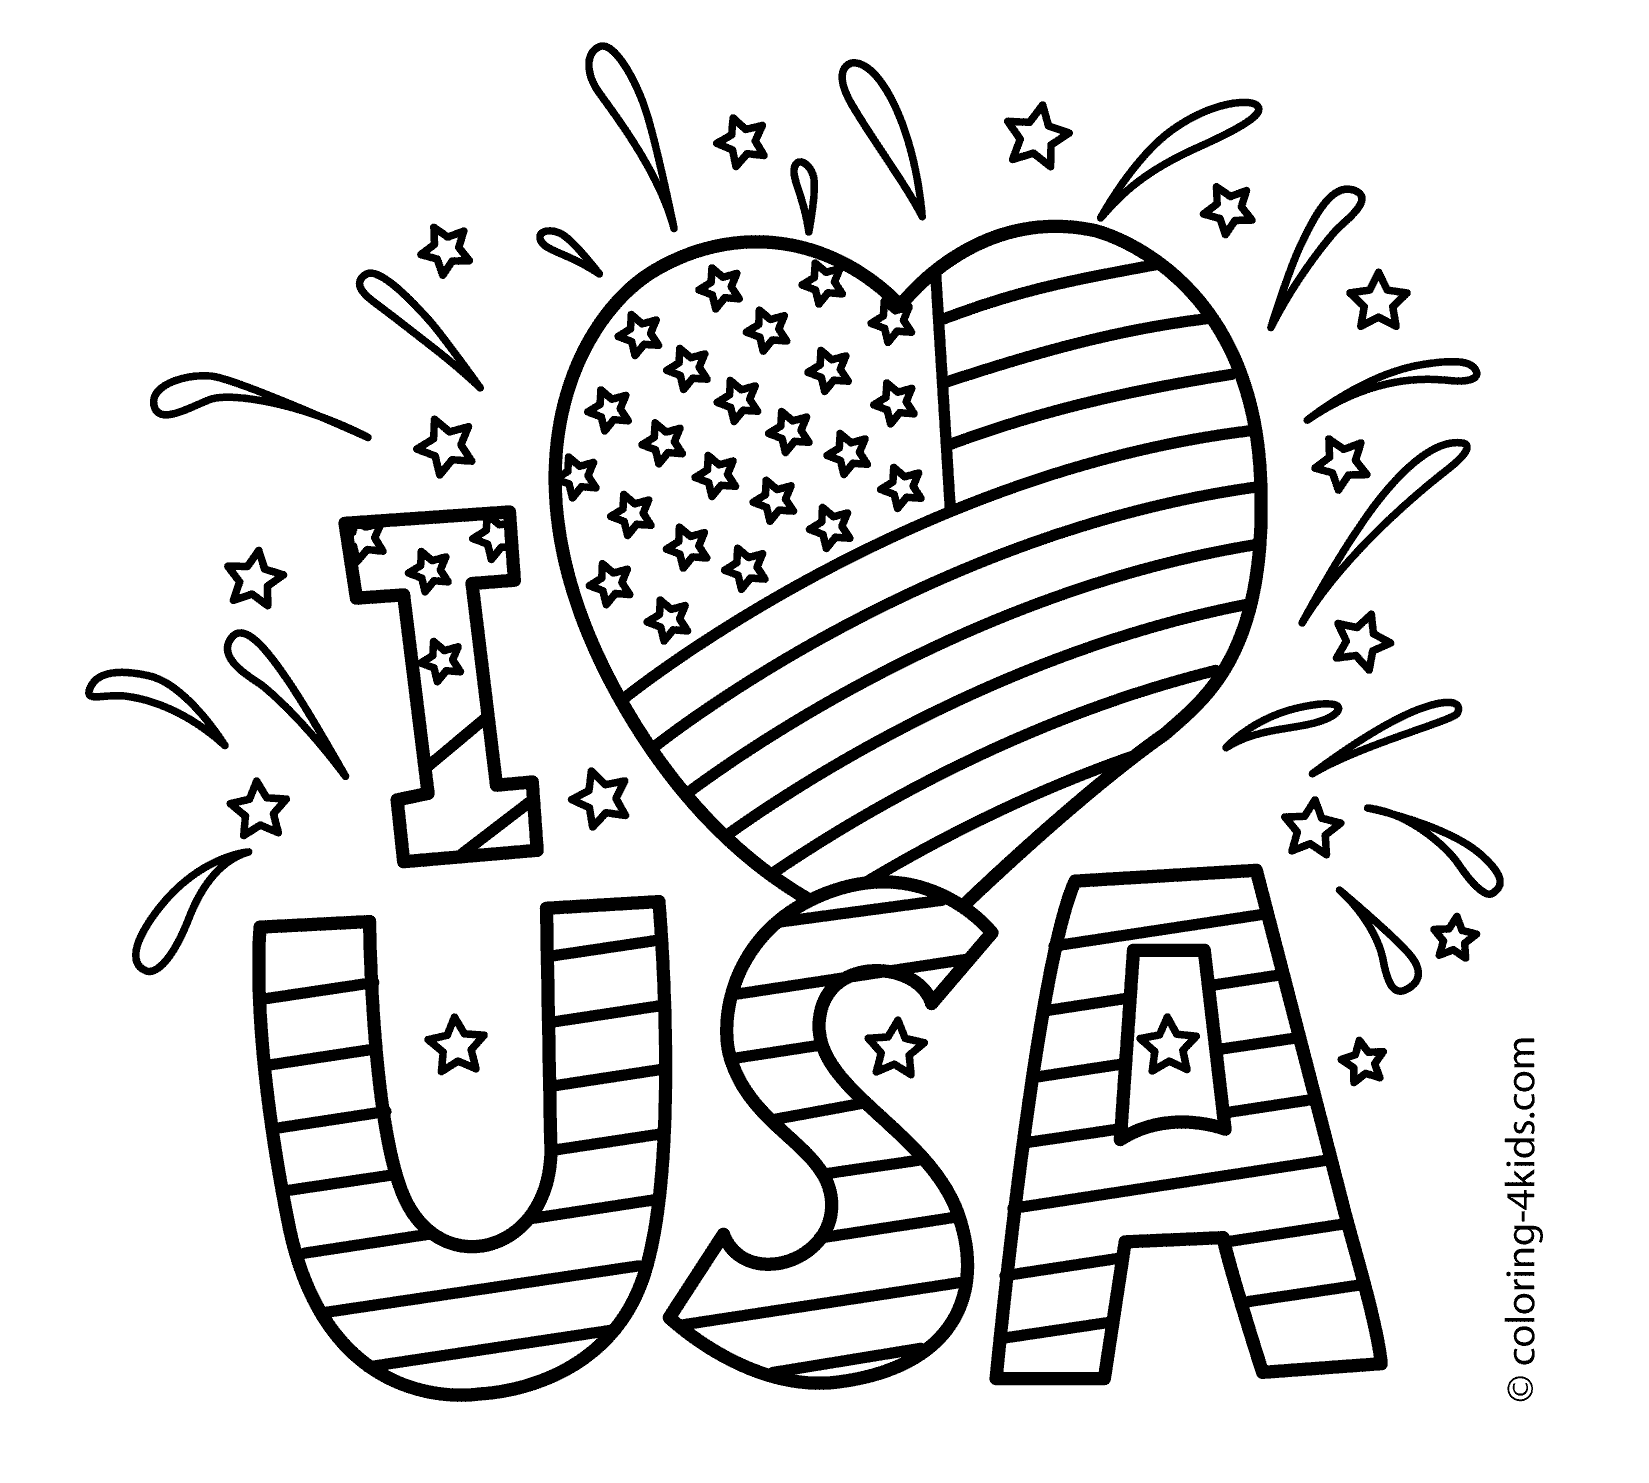 independence day coloring pictures independence day coloring pages to download and print for free coloring pictures day independence 